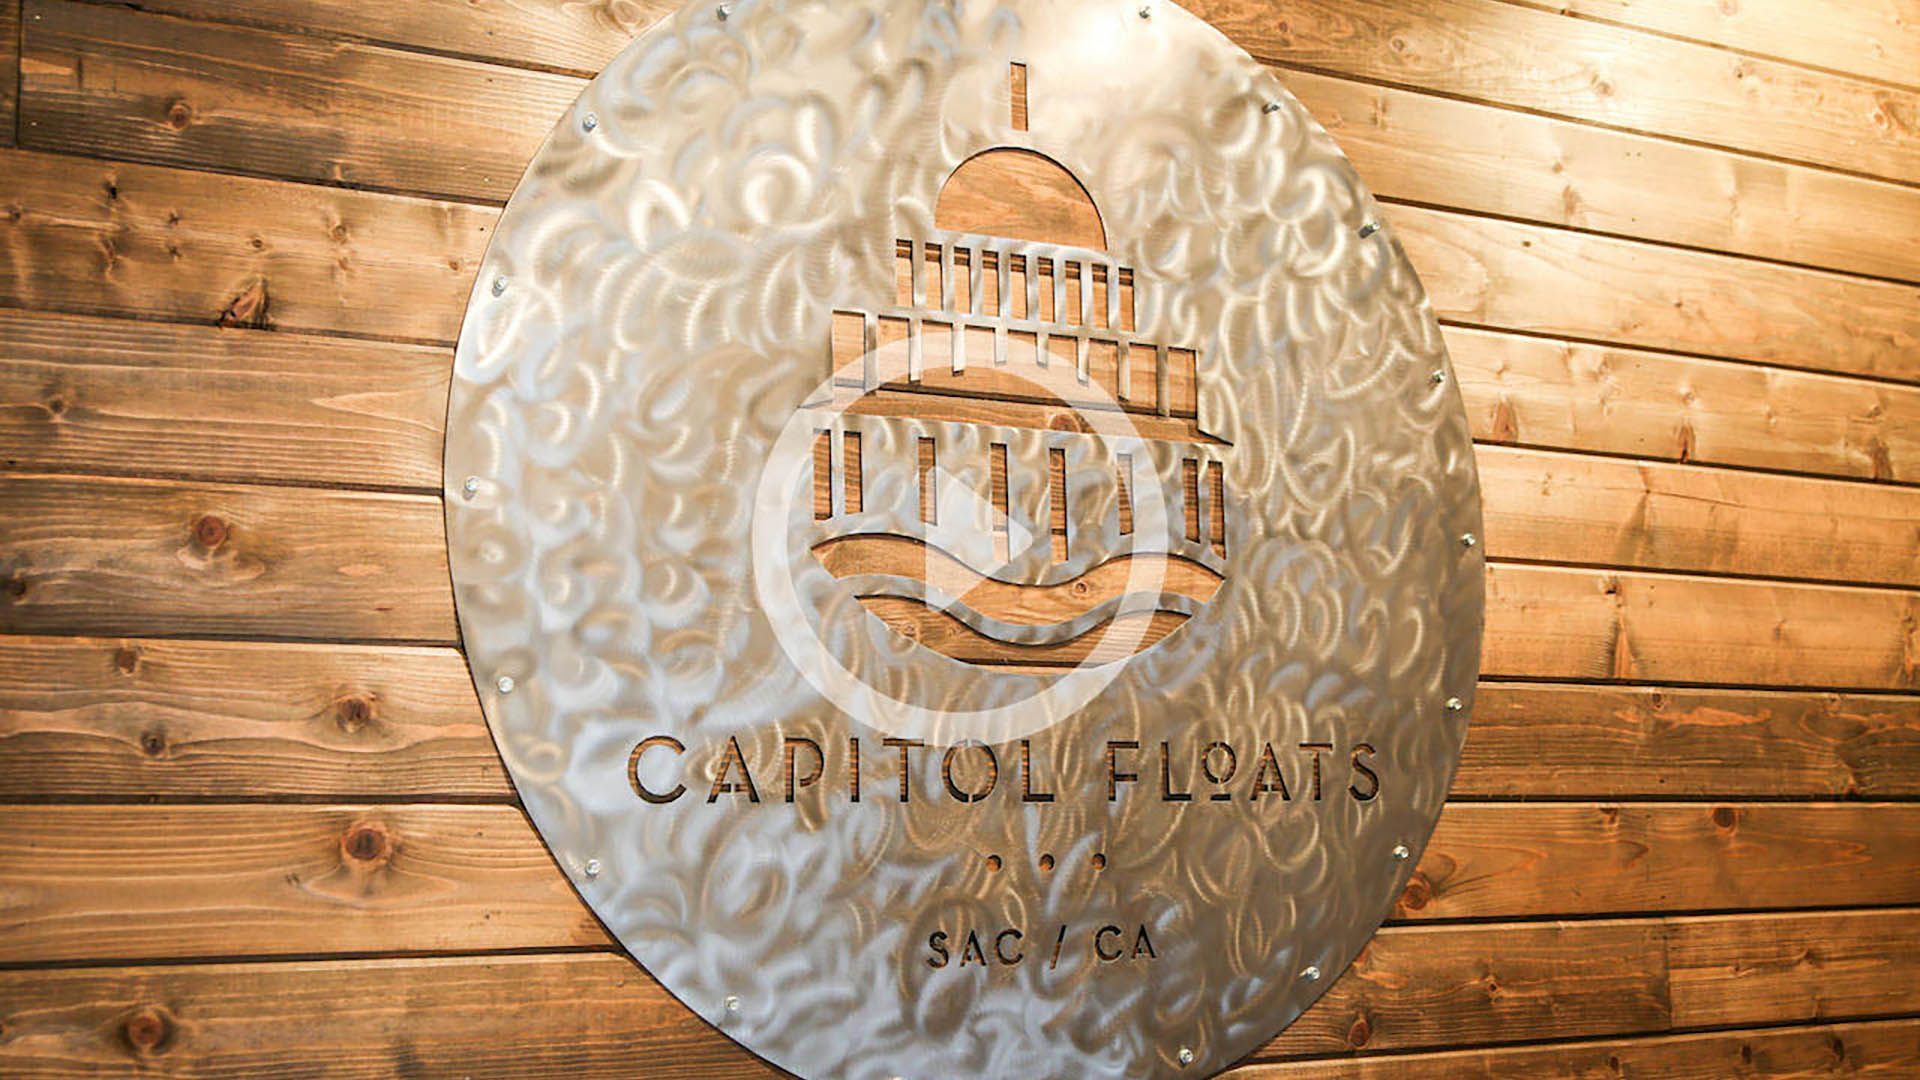 A sign on a wooden wall that says capitol floats